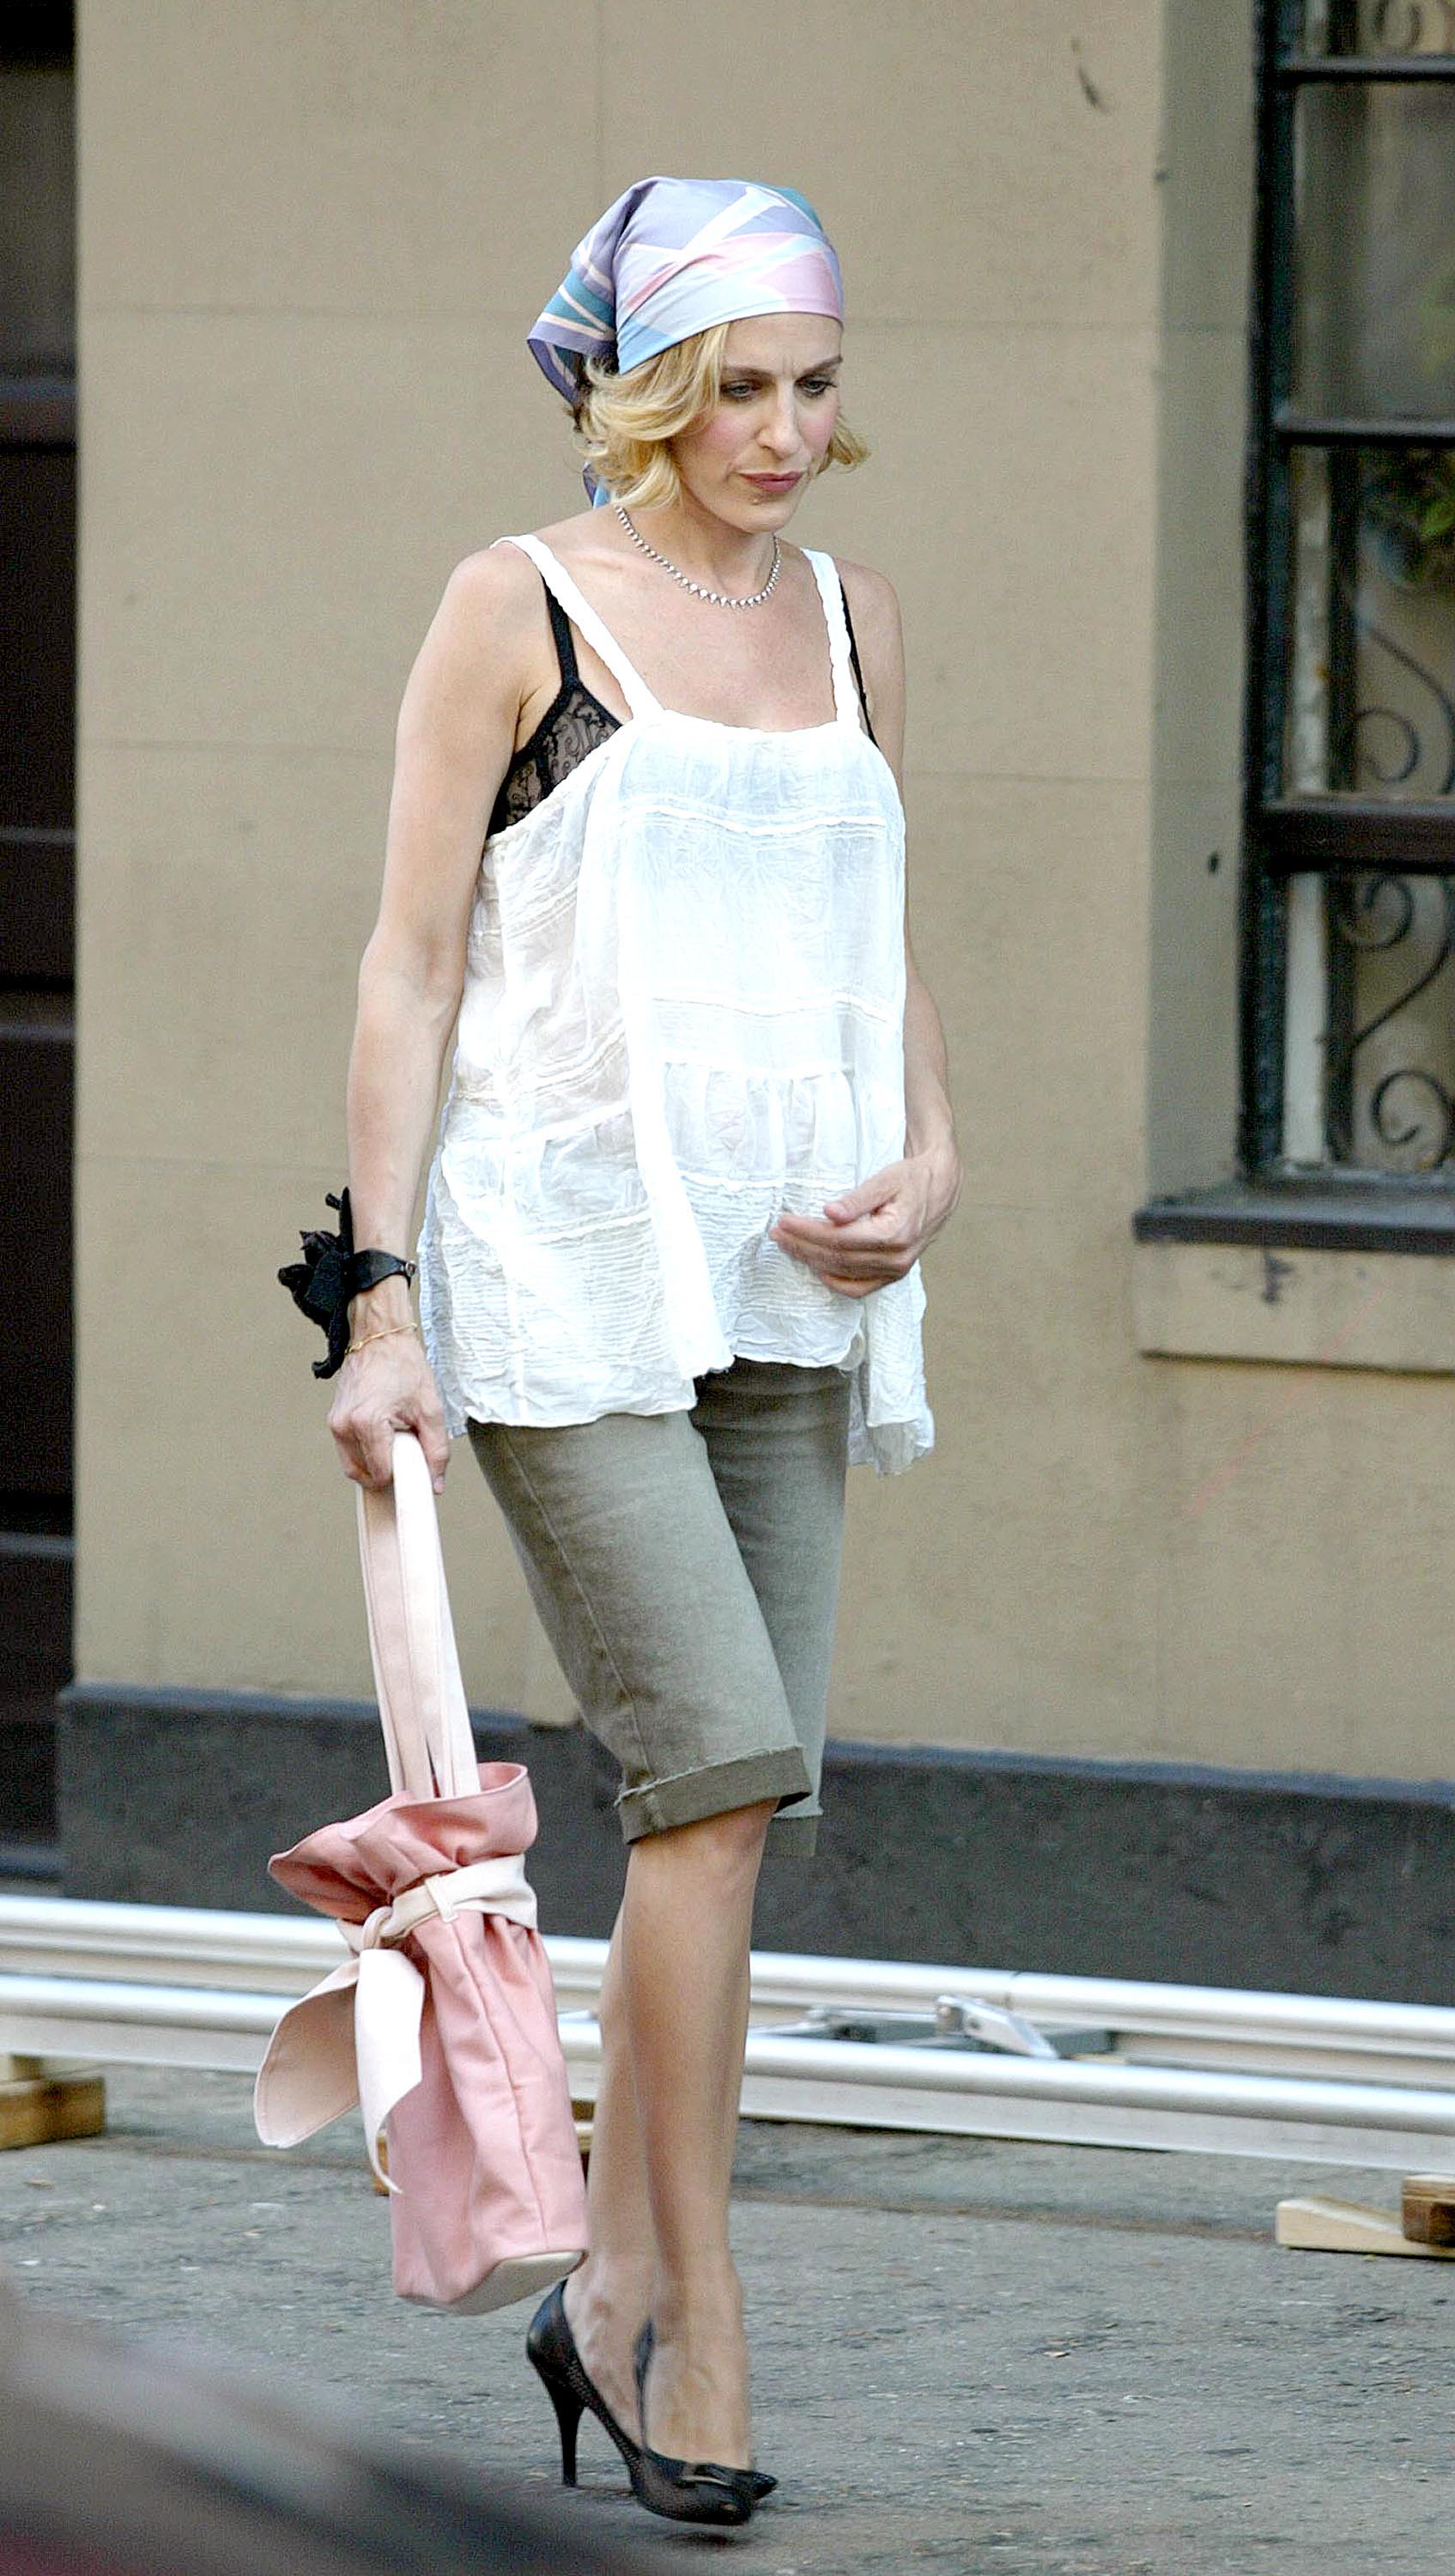 Sarah Jessica is spotted on location wearing a babydoll tank top to hide her pregnancy during the filming of 'Sex and the City' season 5